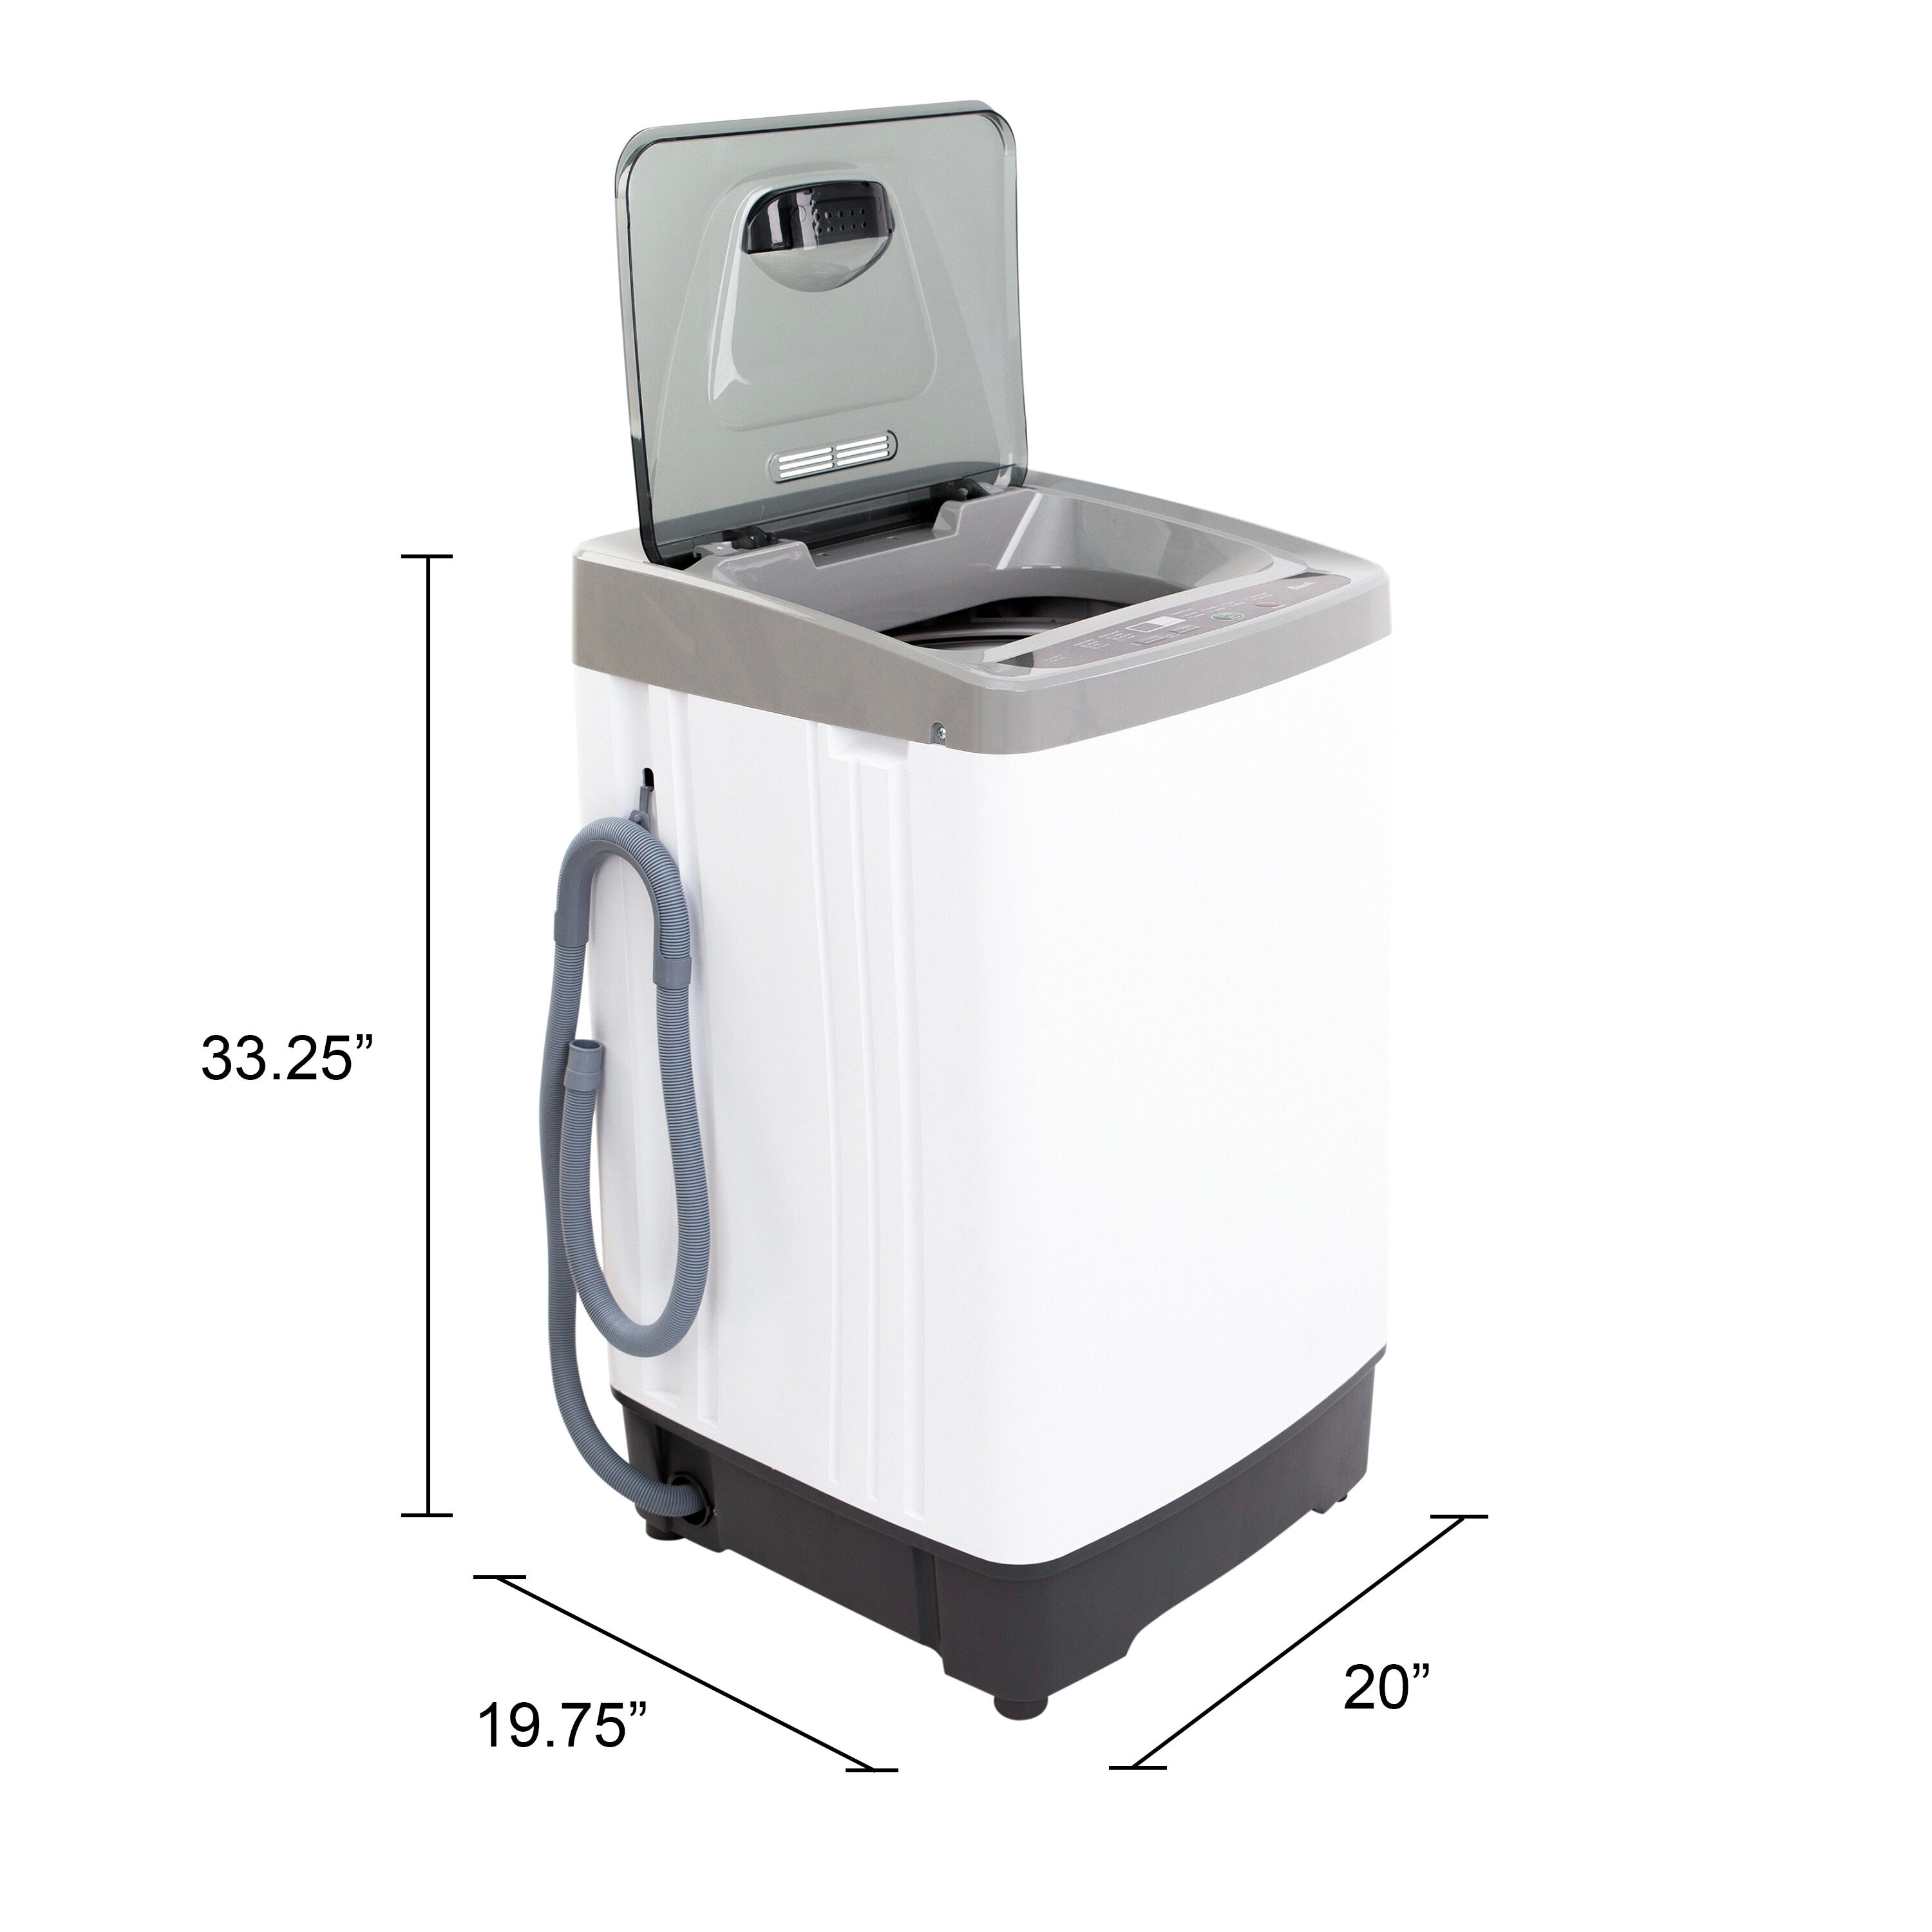 Panda Portable Washing Machine, 1.34 Cu.ft, 10 Wash Programs, 2 built in  rollers/casters, Compact Top Load Clothes Washer - Walmart.com